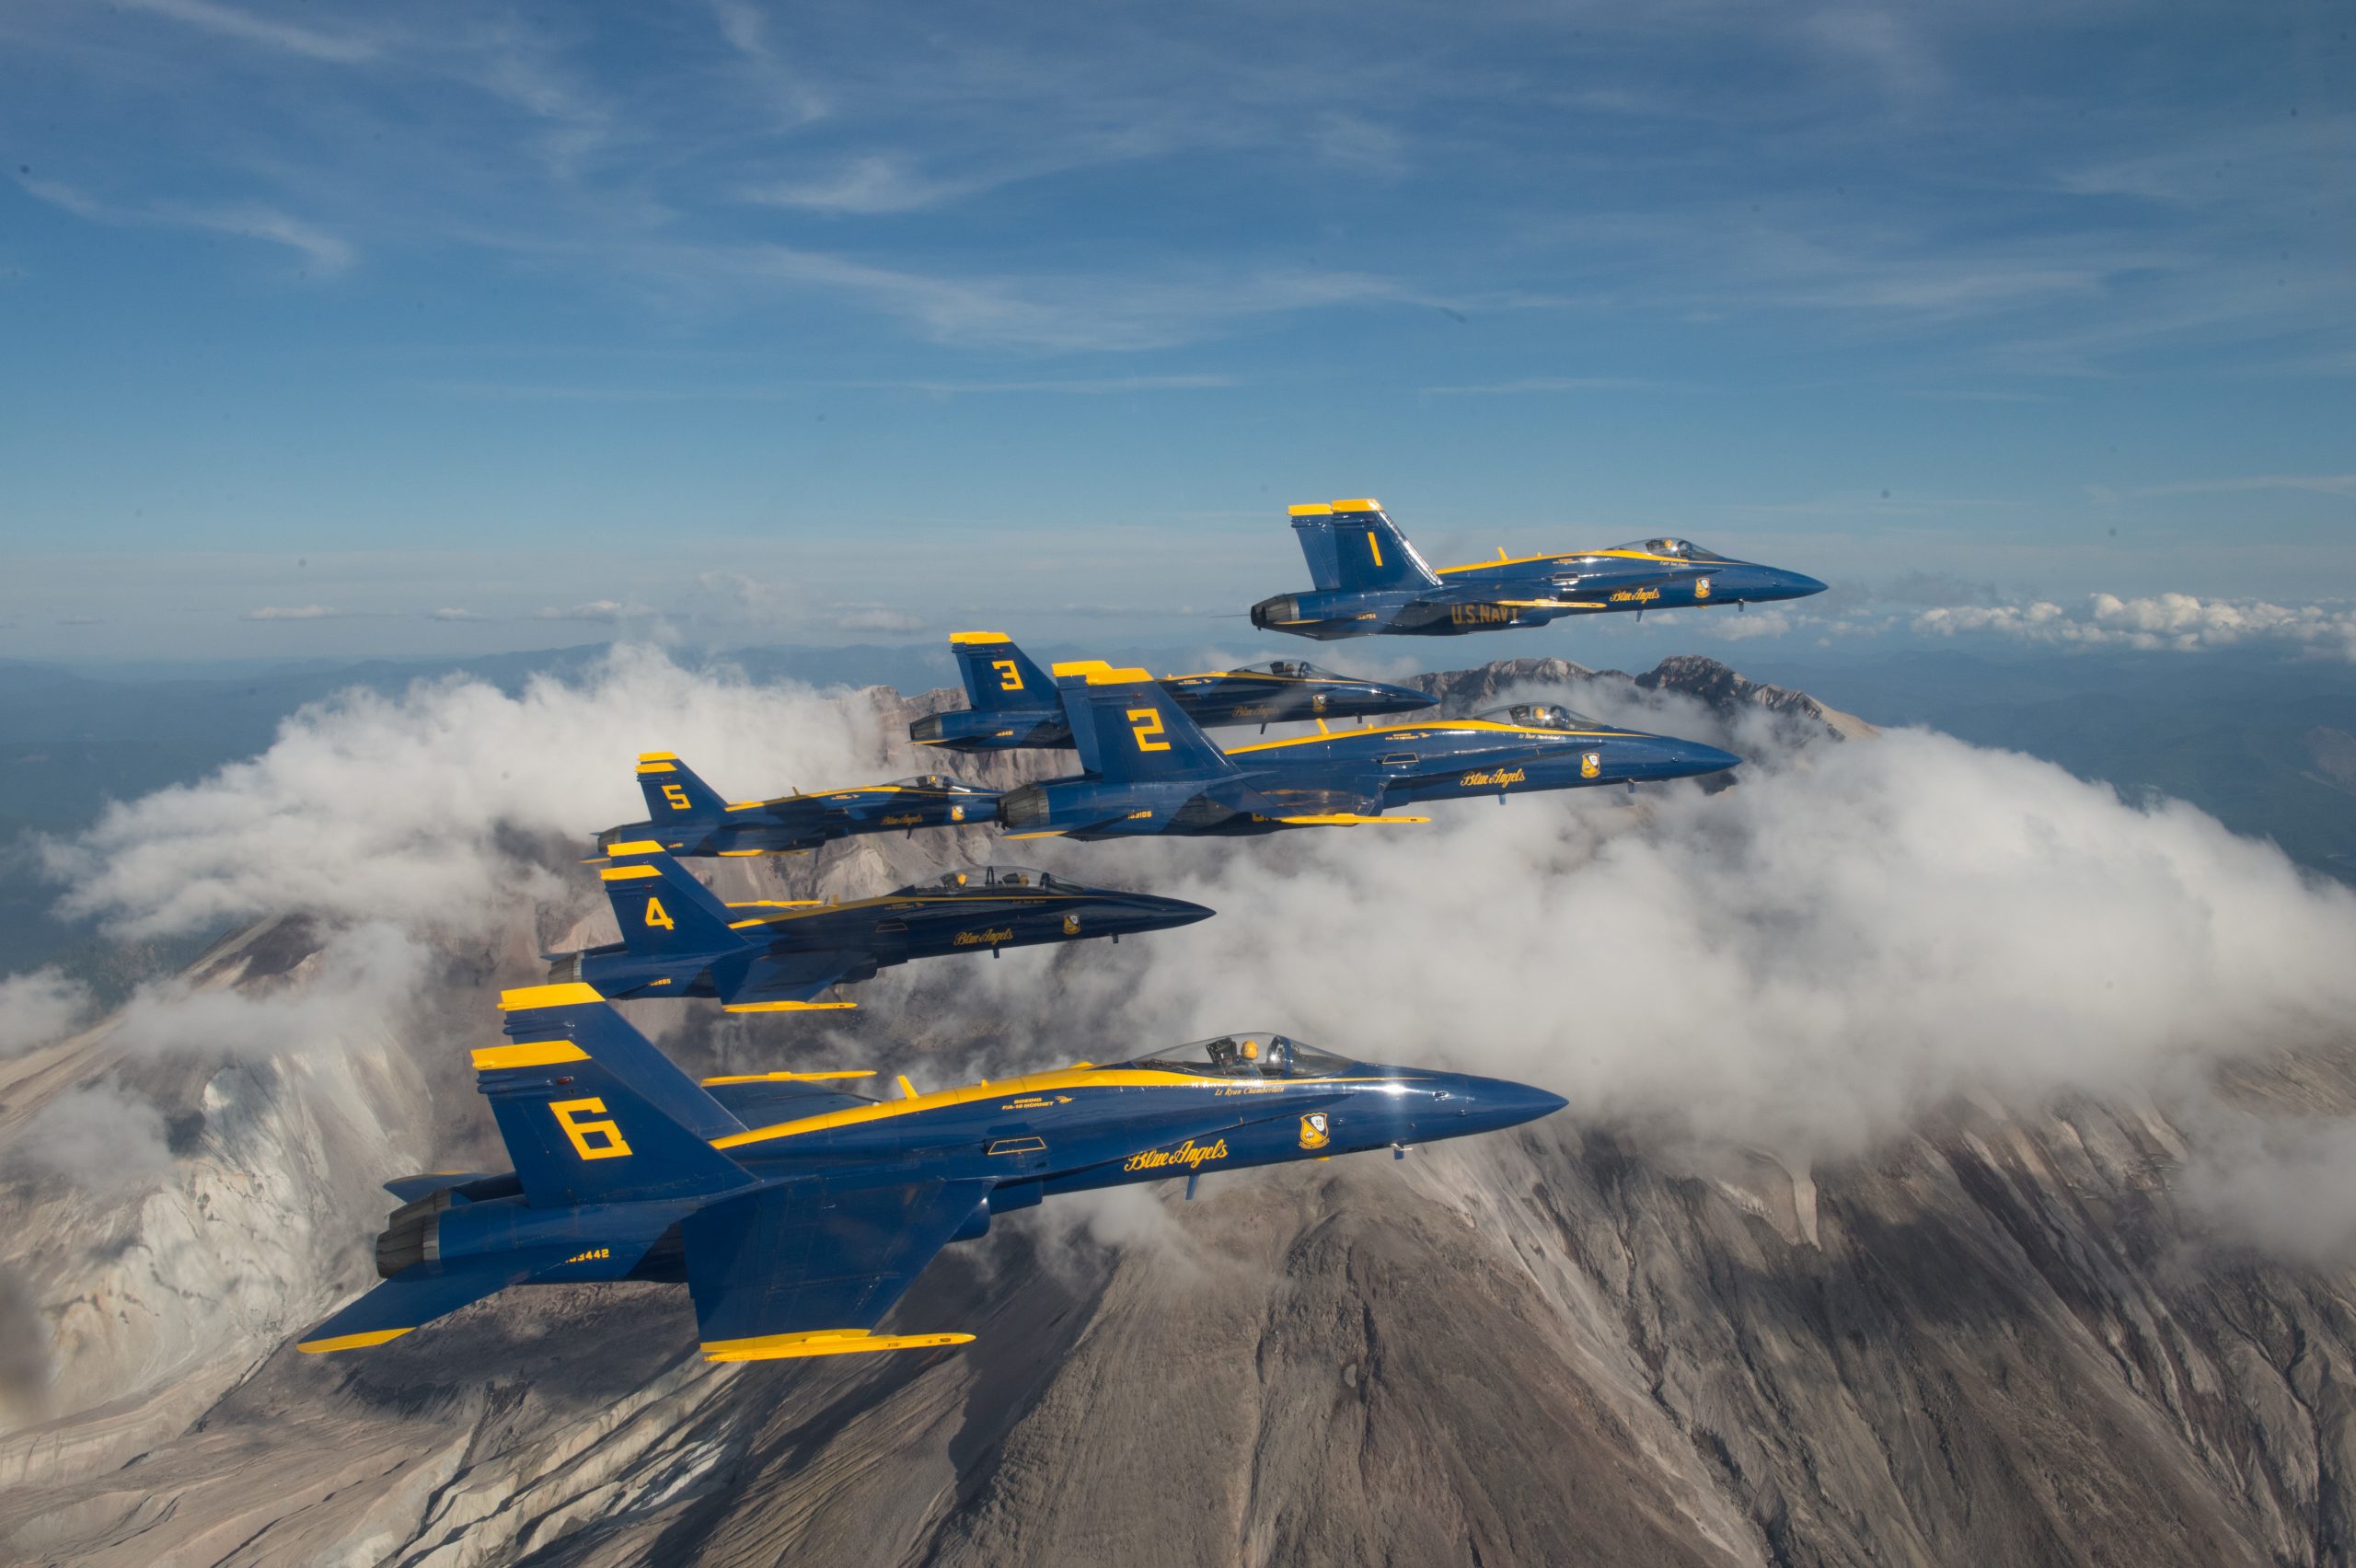 Are You Ready For The 2022 Blue Angels Air Shows? Here Is Where The Team Will Perform Next Year